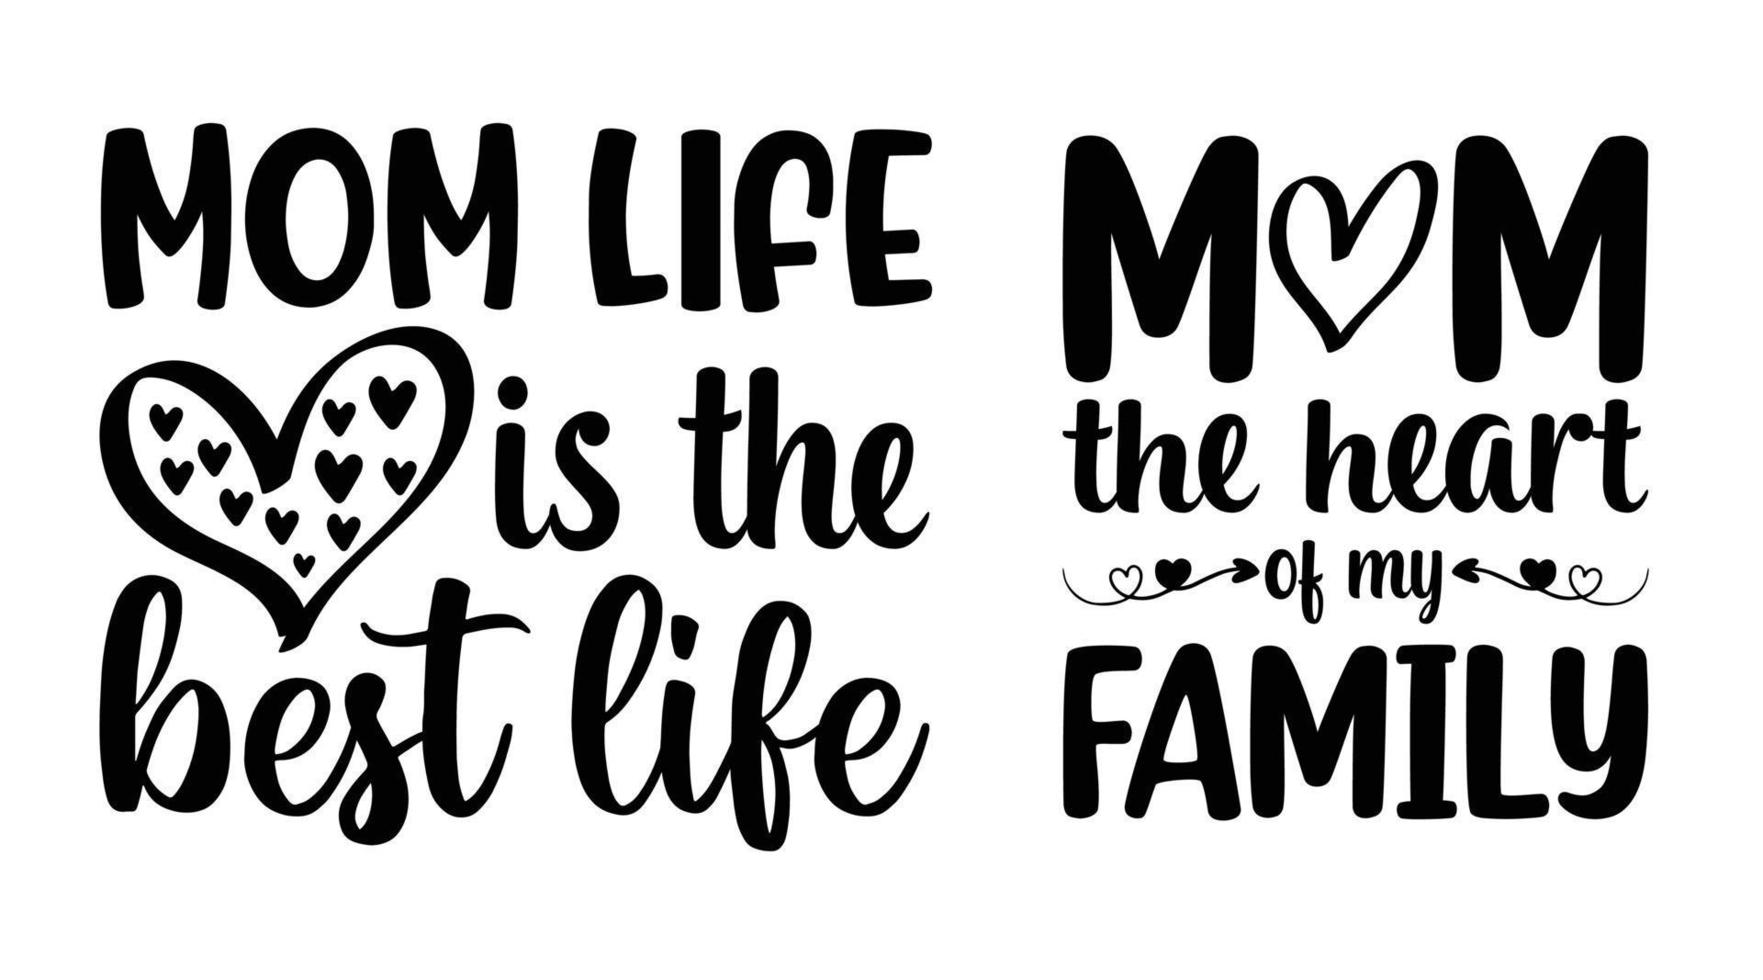 Mom's life is the best life, mom is the heart of my family. Mom's t-shirt design, Mother's day awesome and creative t-shirt design free download vector